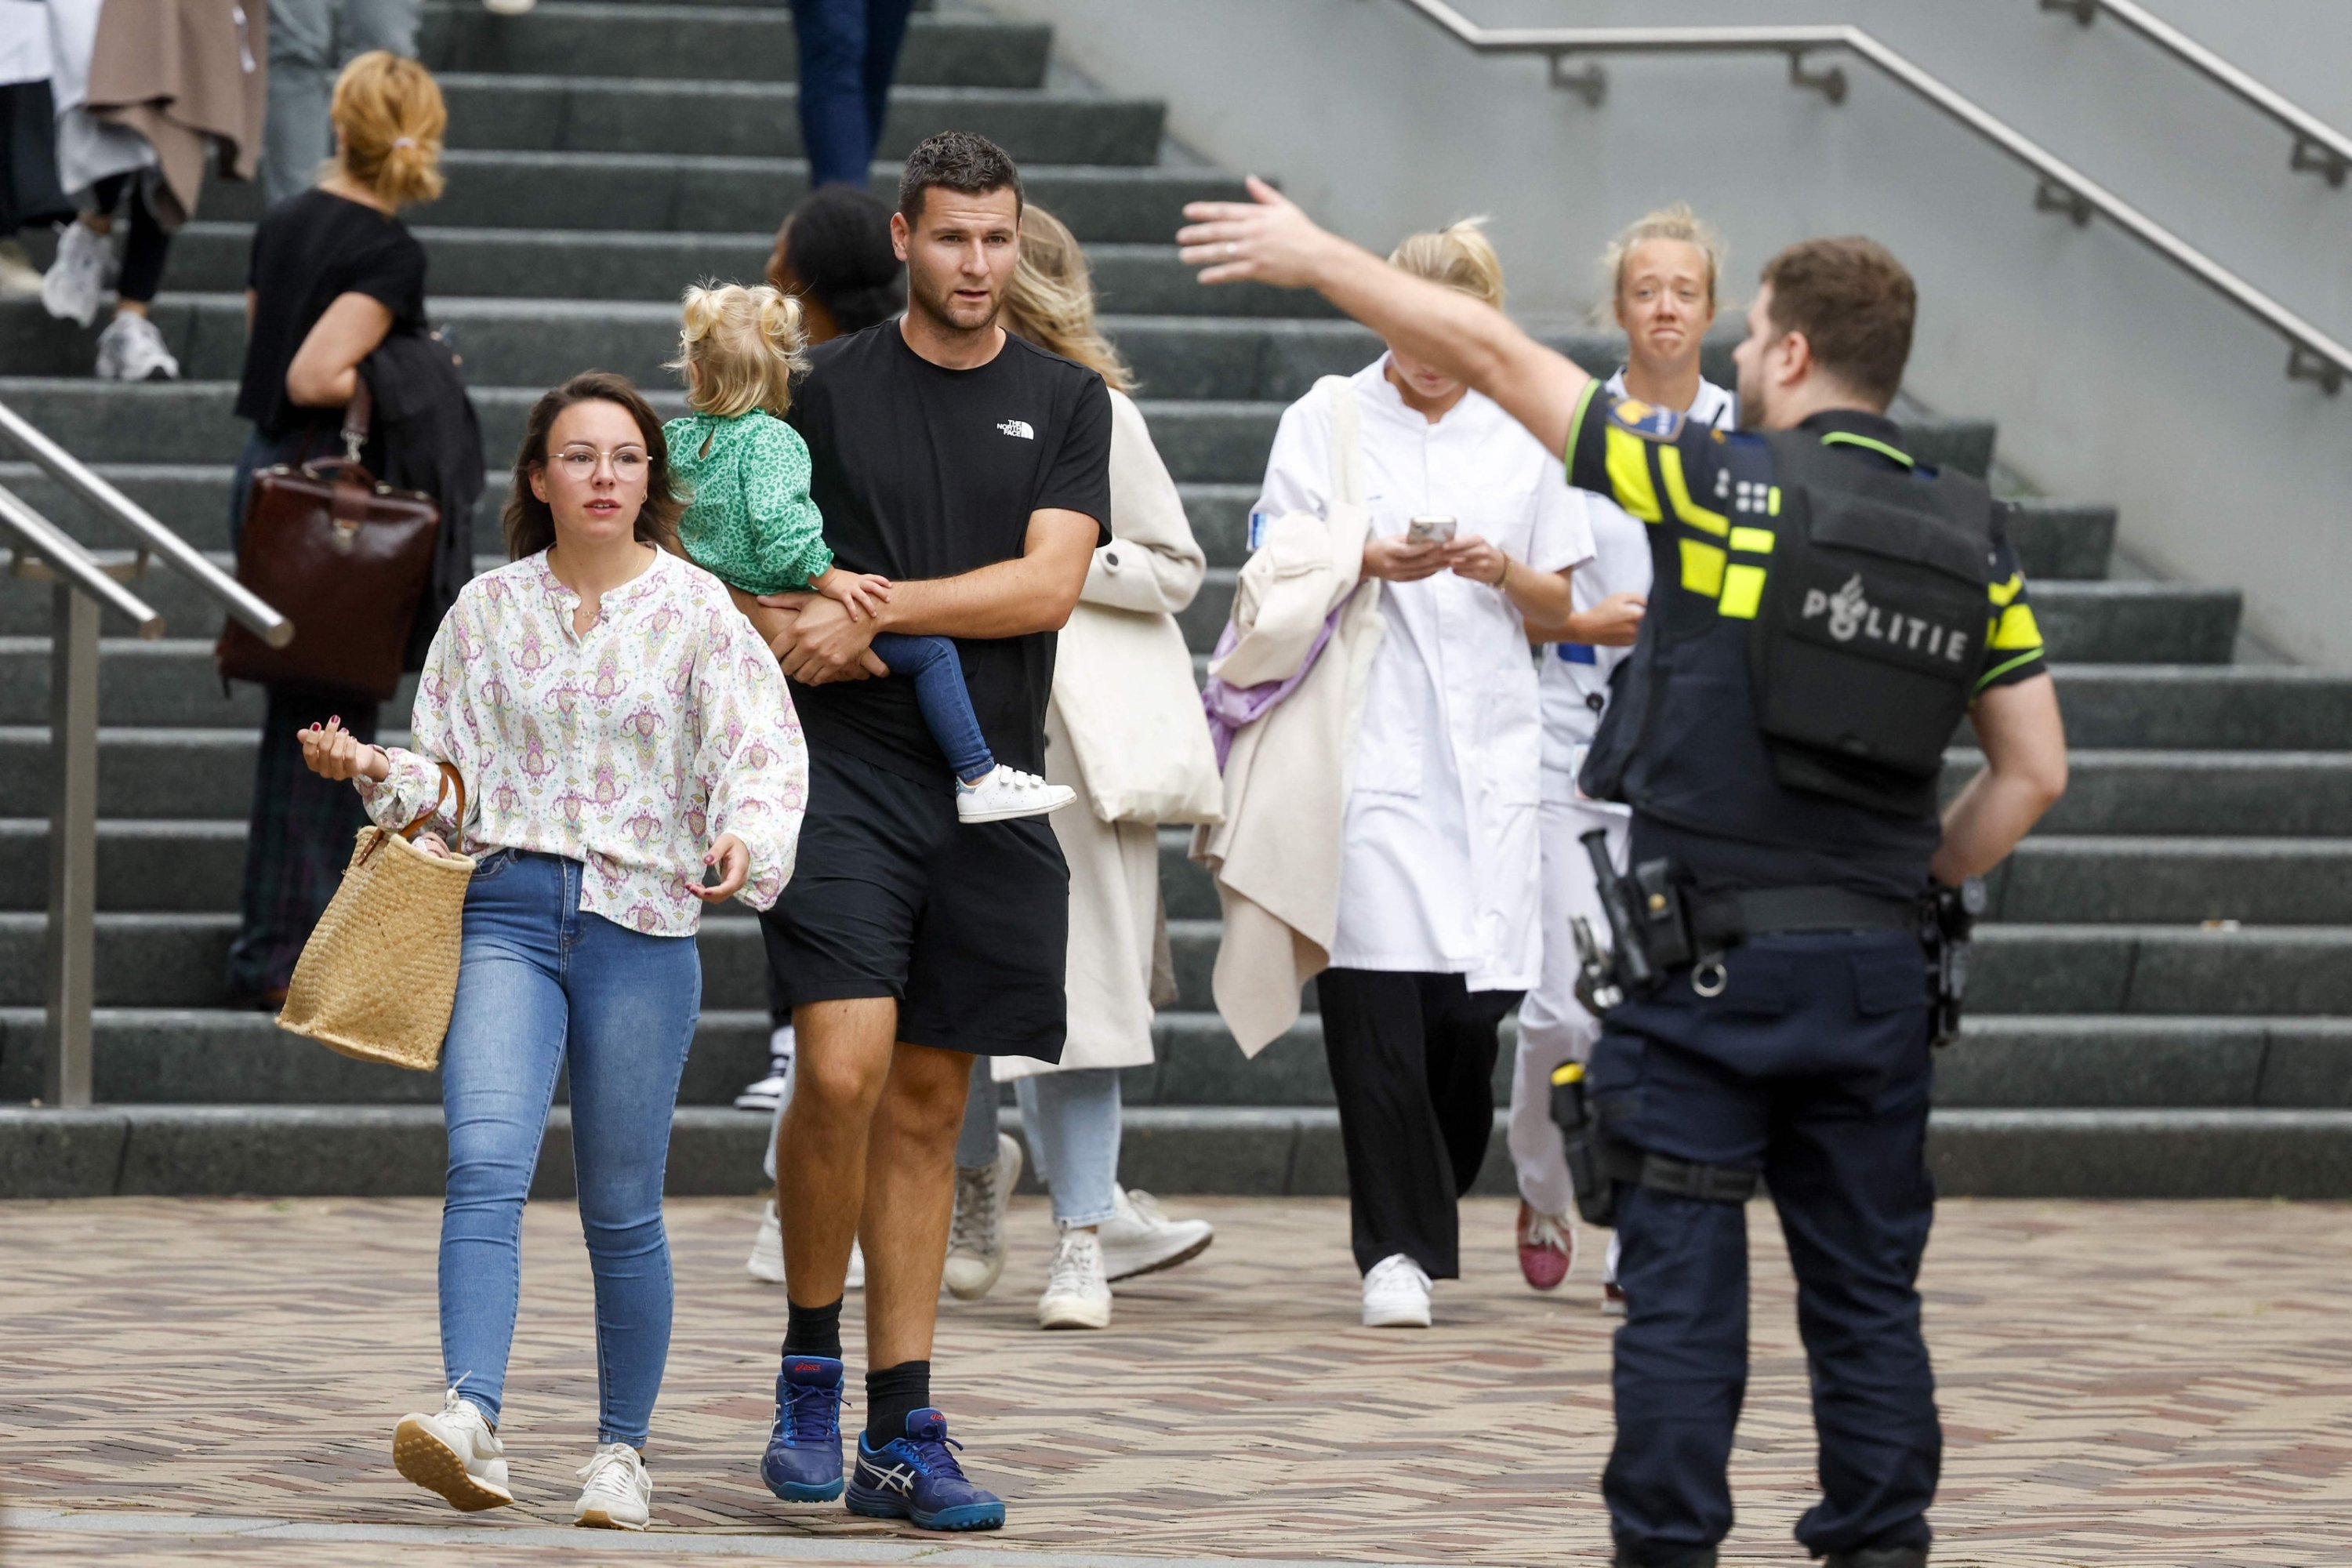 Netherlands police officer directs bystanders from an entrance to the Erasmus University Medical Center (Erasmus MC), which was cordoned off after two reported shooting incidents, in Rotterdam, Netherlands, Sept. 28, 2023. (AFP Photo)